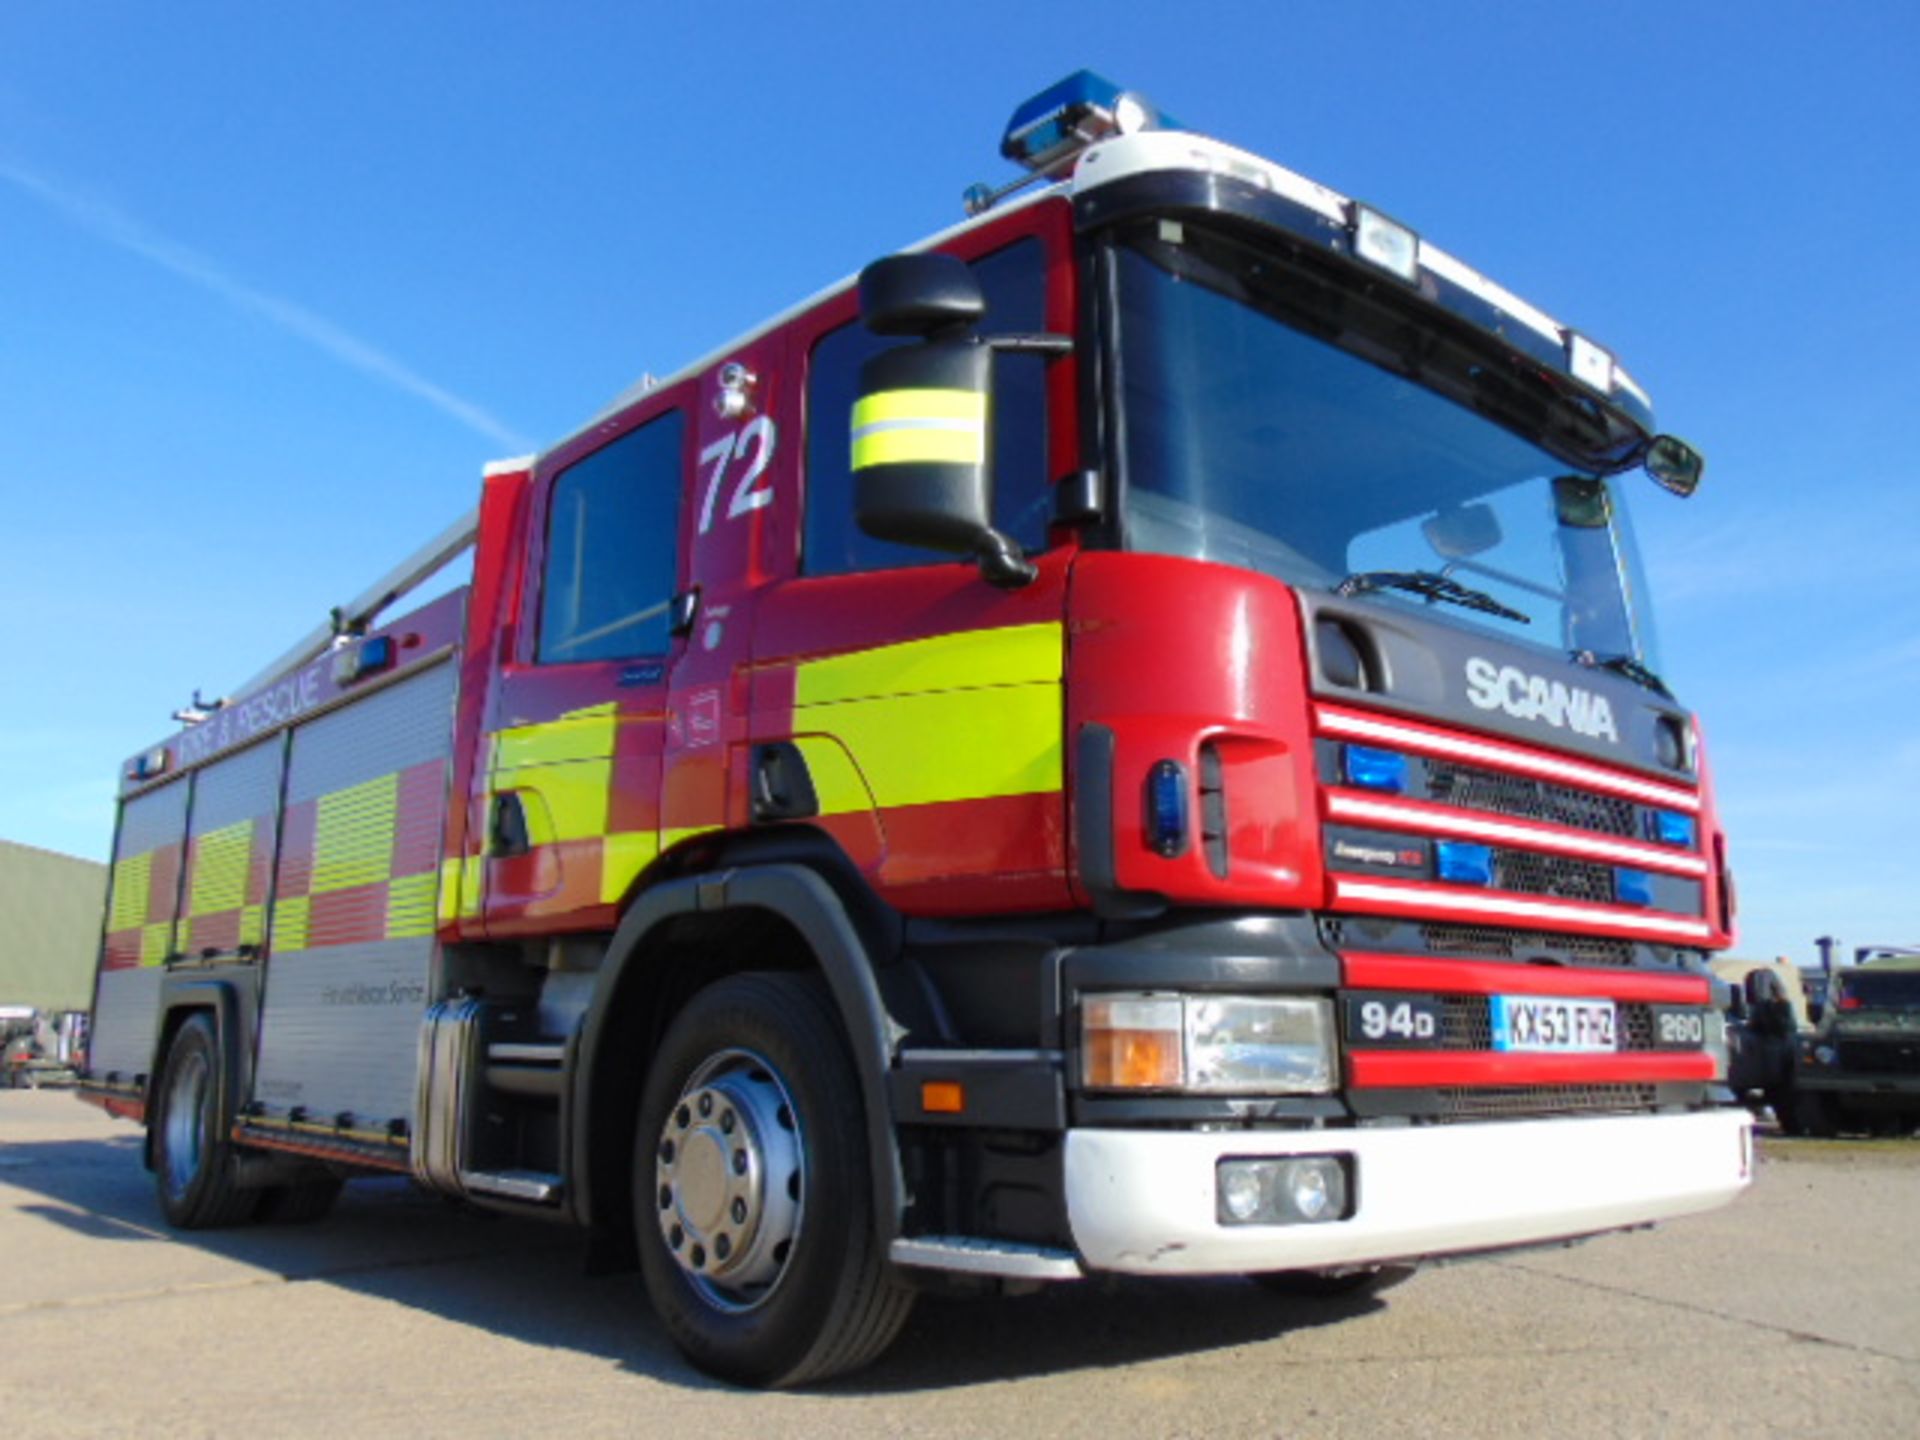 Scania 94D 260 / Emergency One Fire Engine - Image 10 of 40